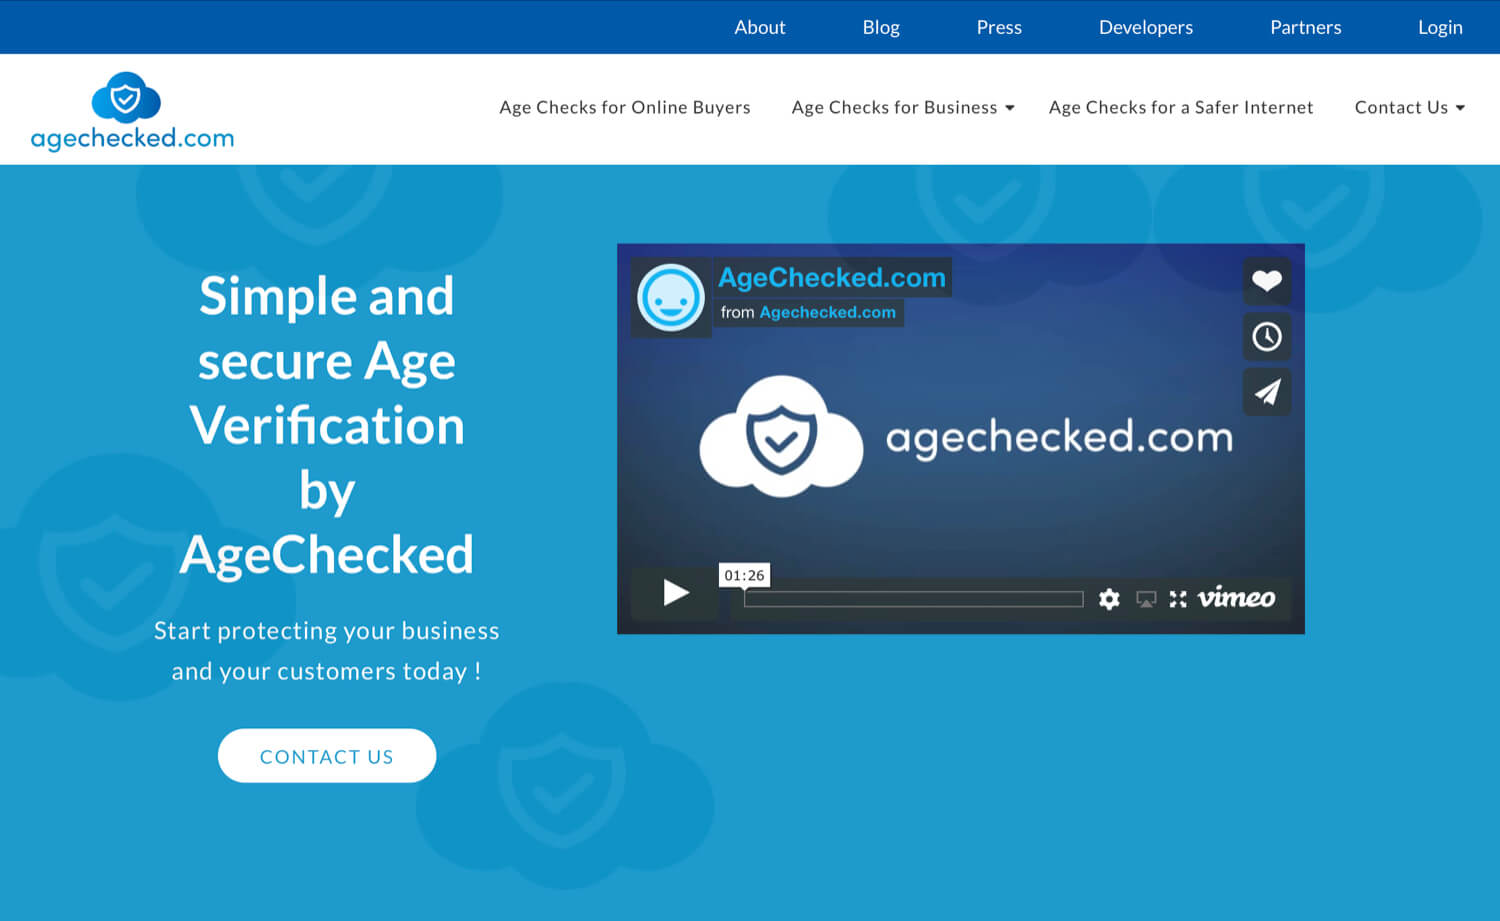 The AgeChecked homepage.